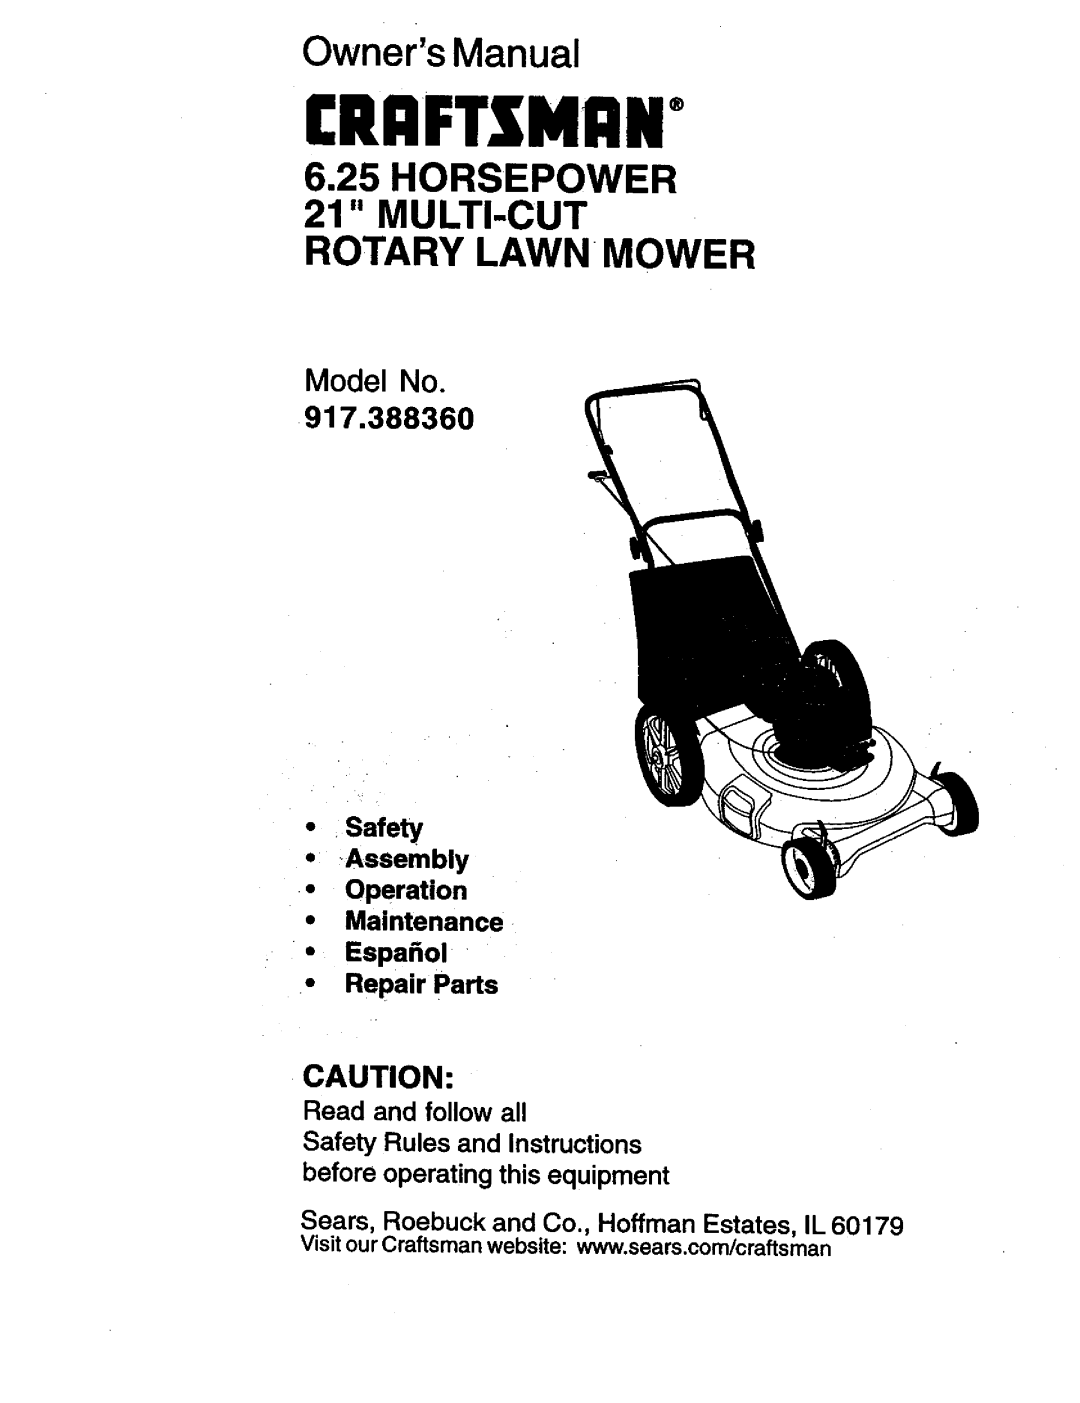 Craftsman owner manual 917.388360, •-Assembly, Rrftsmrn, Owners Manual, 6.25HORSEPOWER 21 MULTI-CUTROTARY LAWN MOWER 